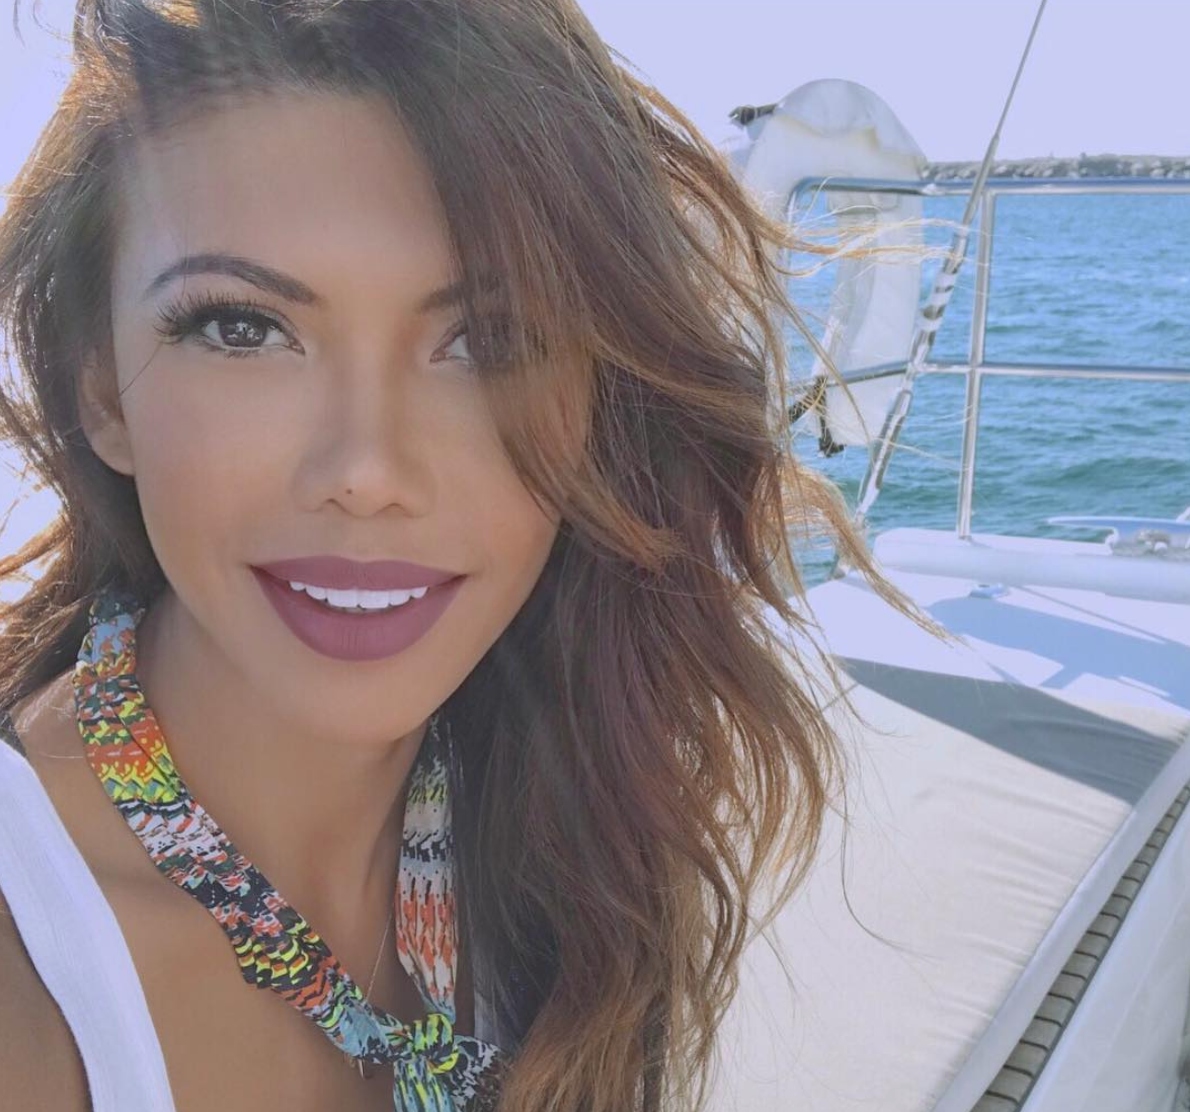 The Ladies Of VH1’s ‘Girls Cruise’ Prove That Age Is Just A Number When It Comes To Beauty